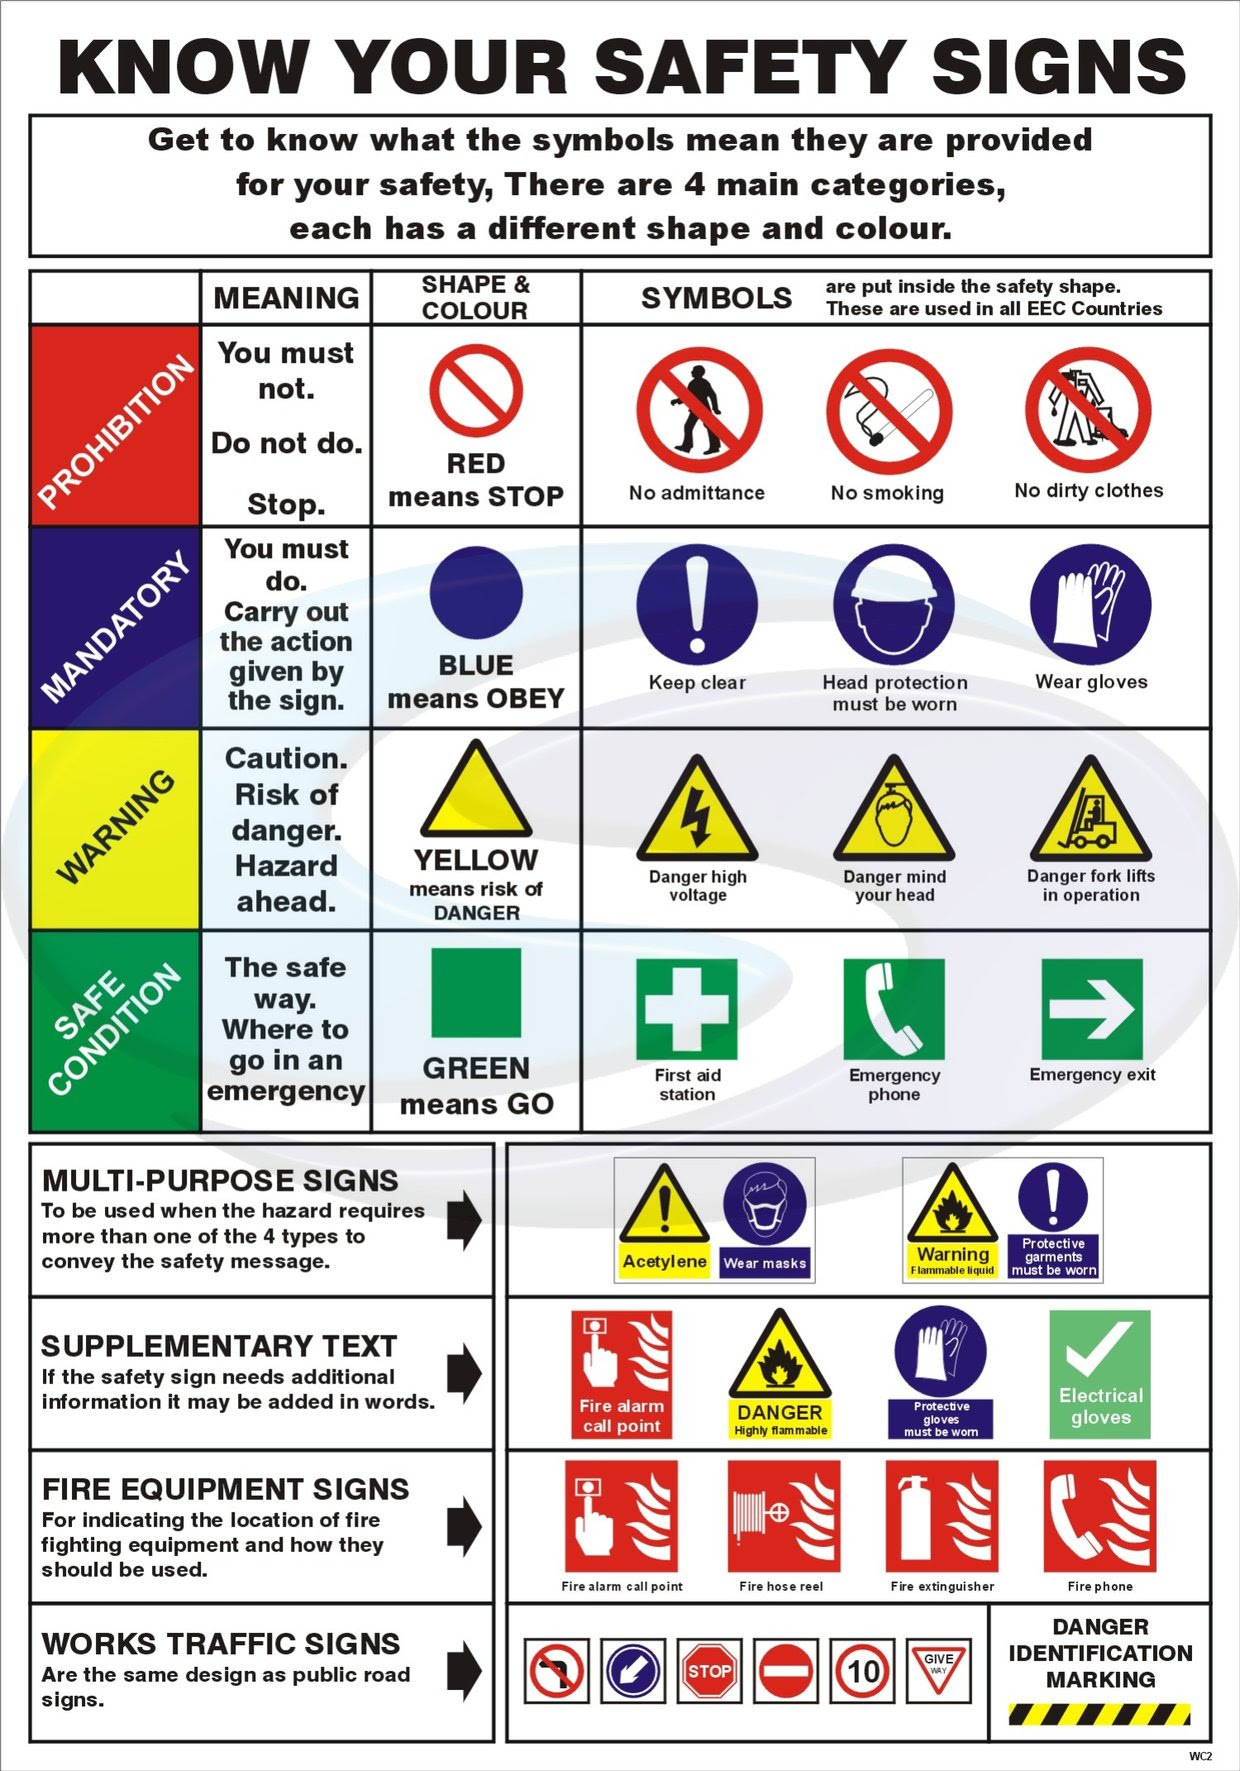 health-insurance-loading-australia-safety-signs-dc-news-update